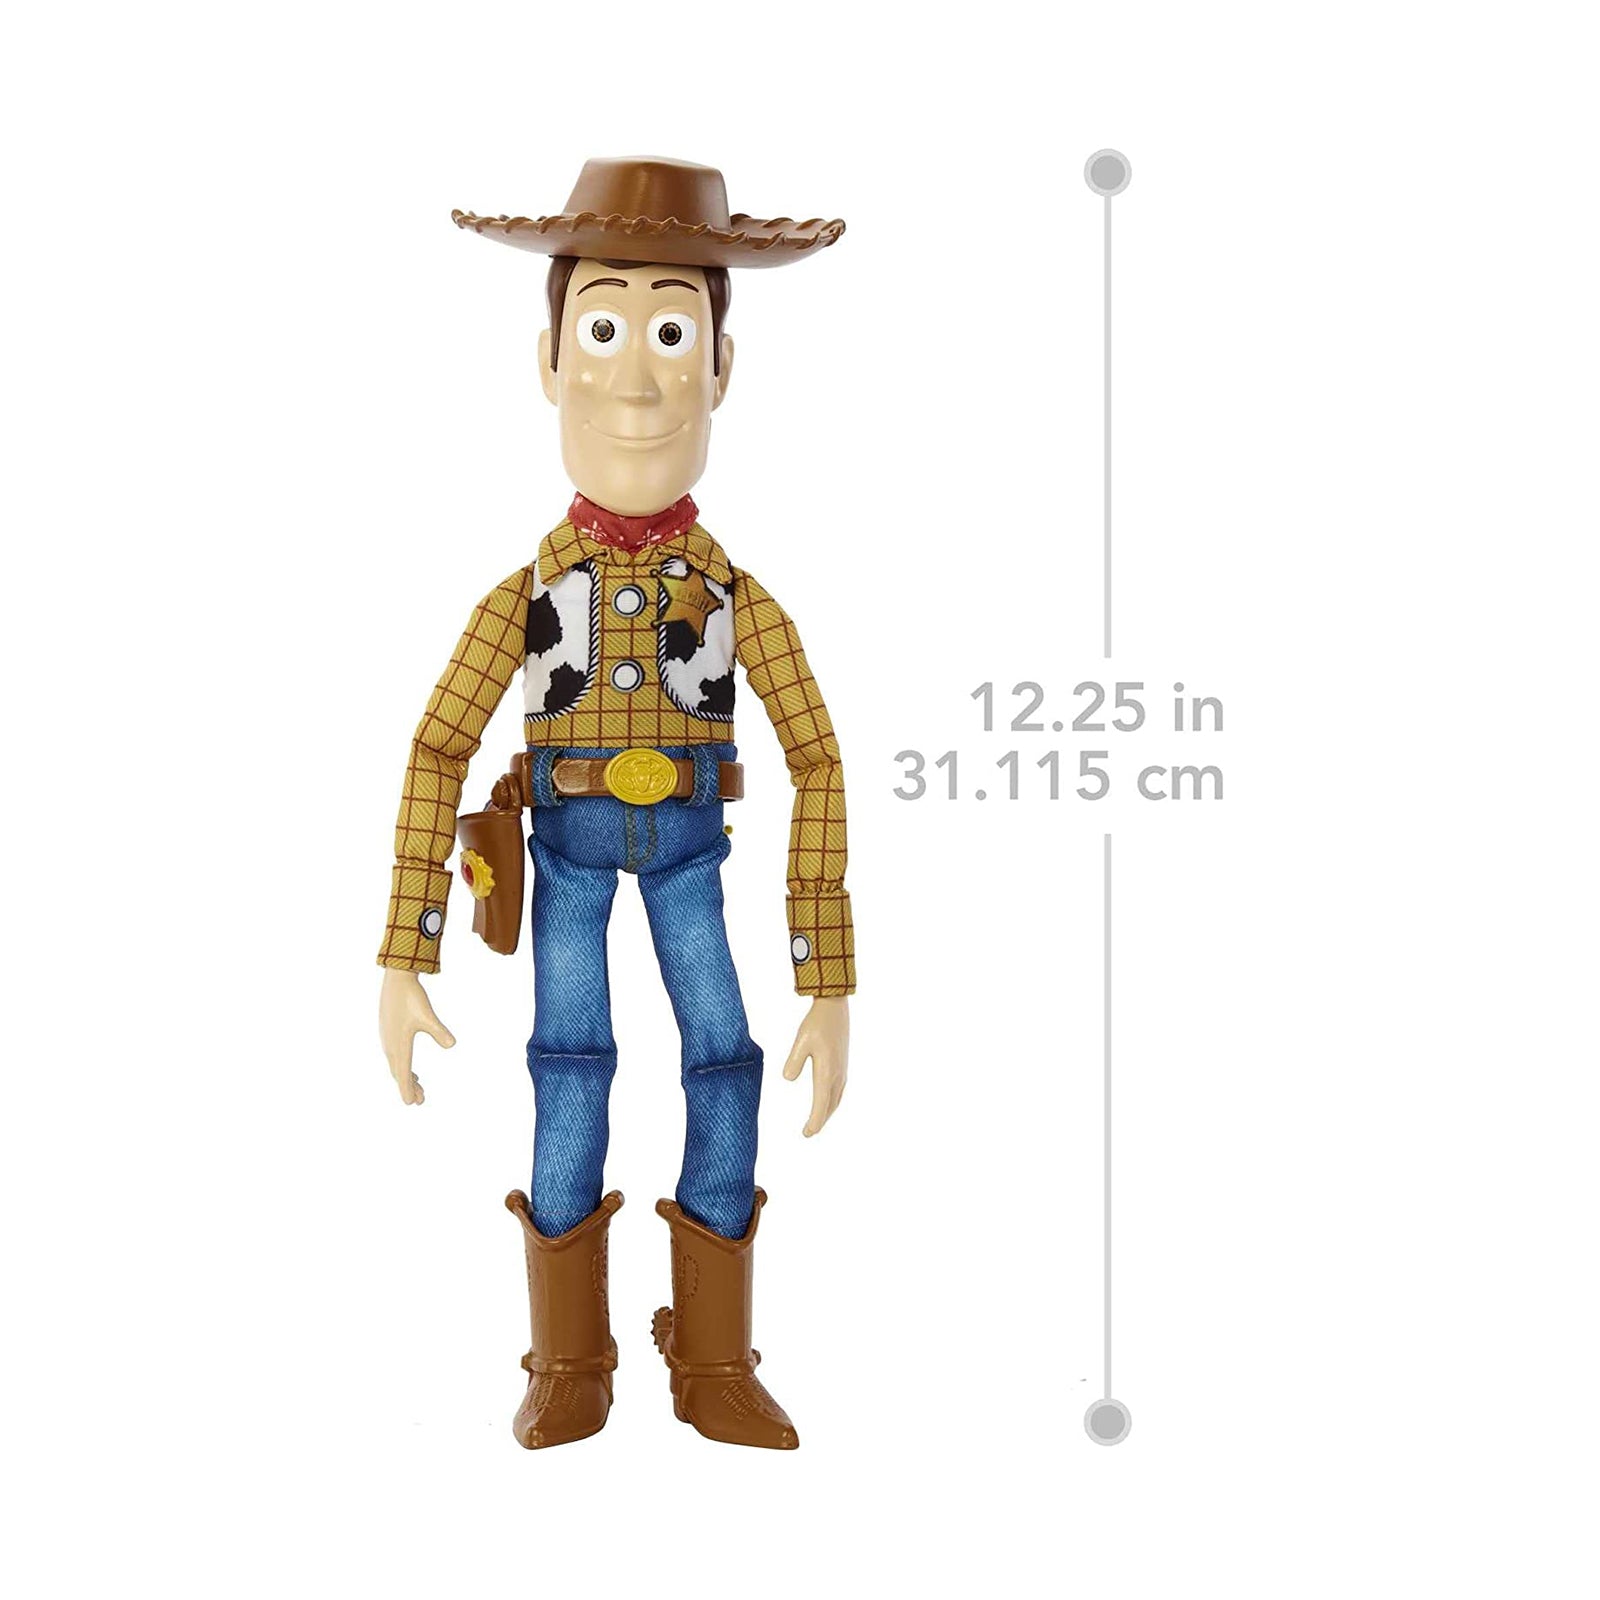 Pin on brinquedo do Toy Story